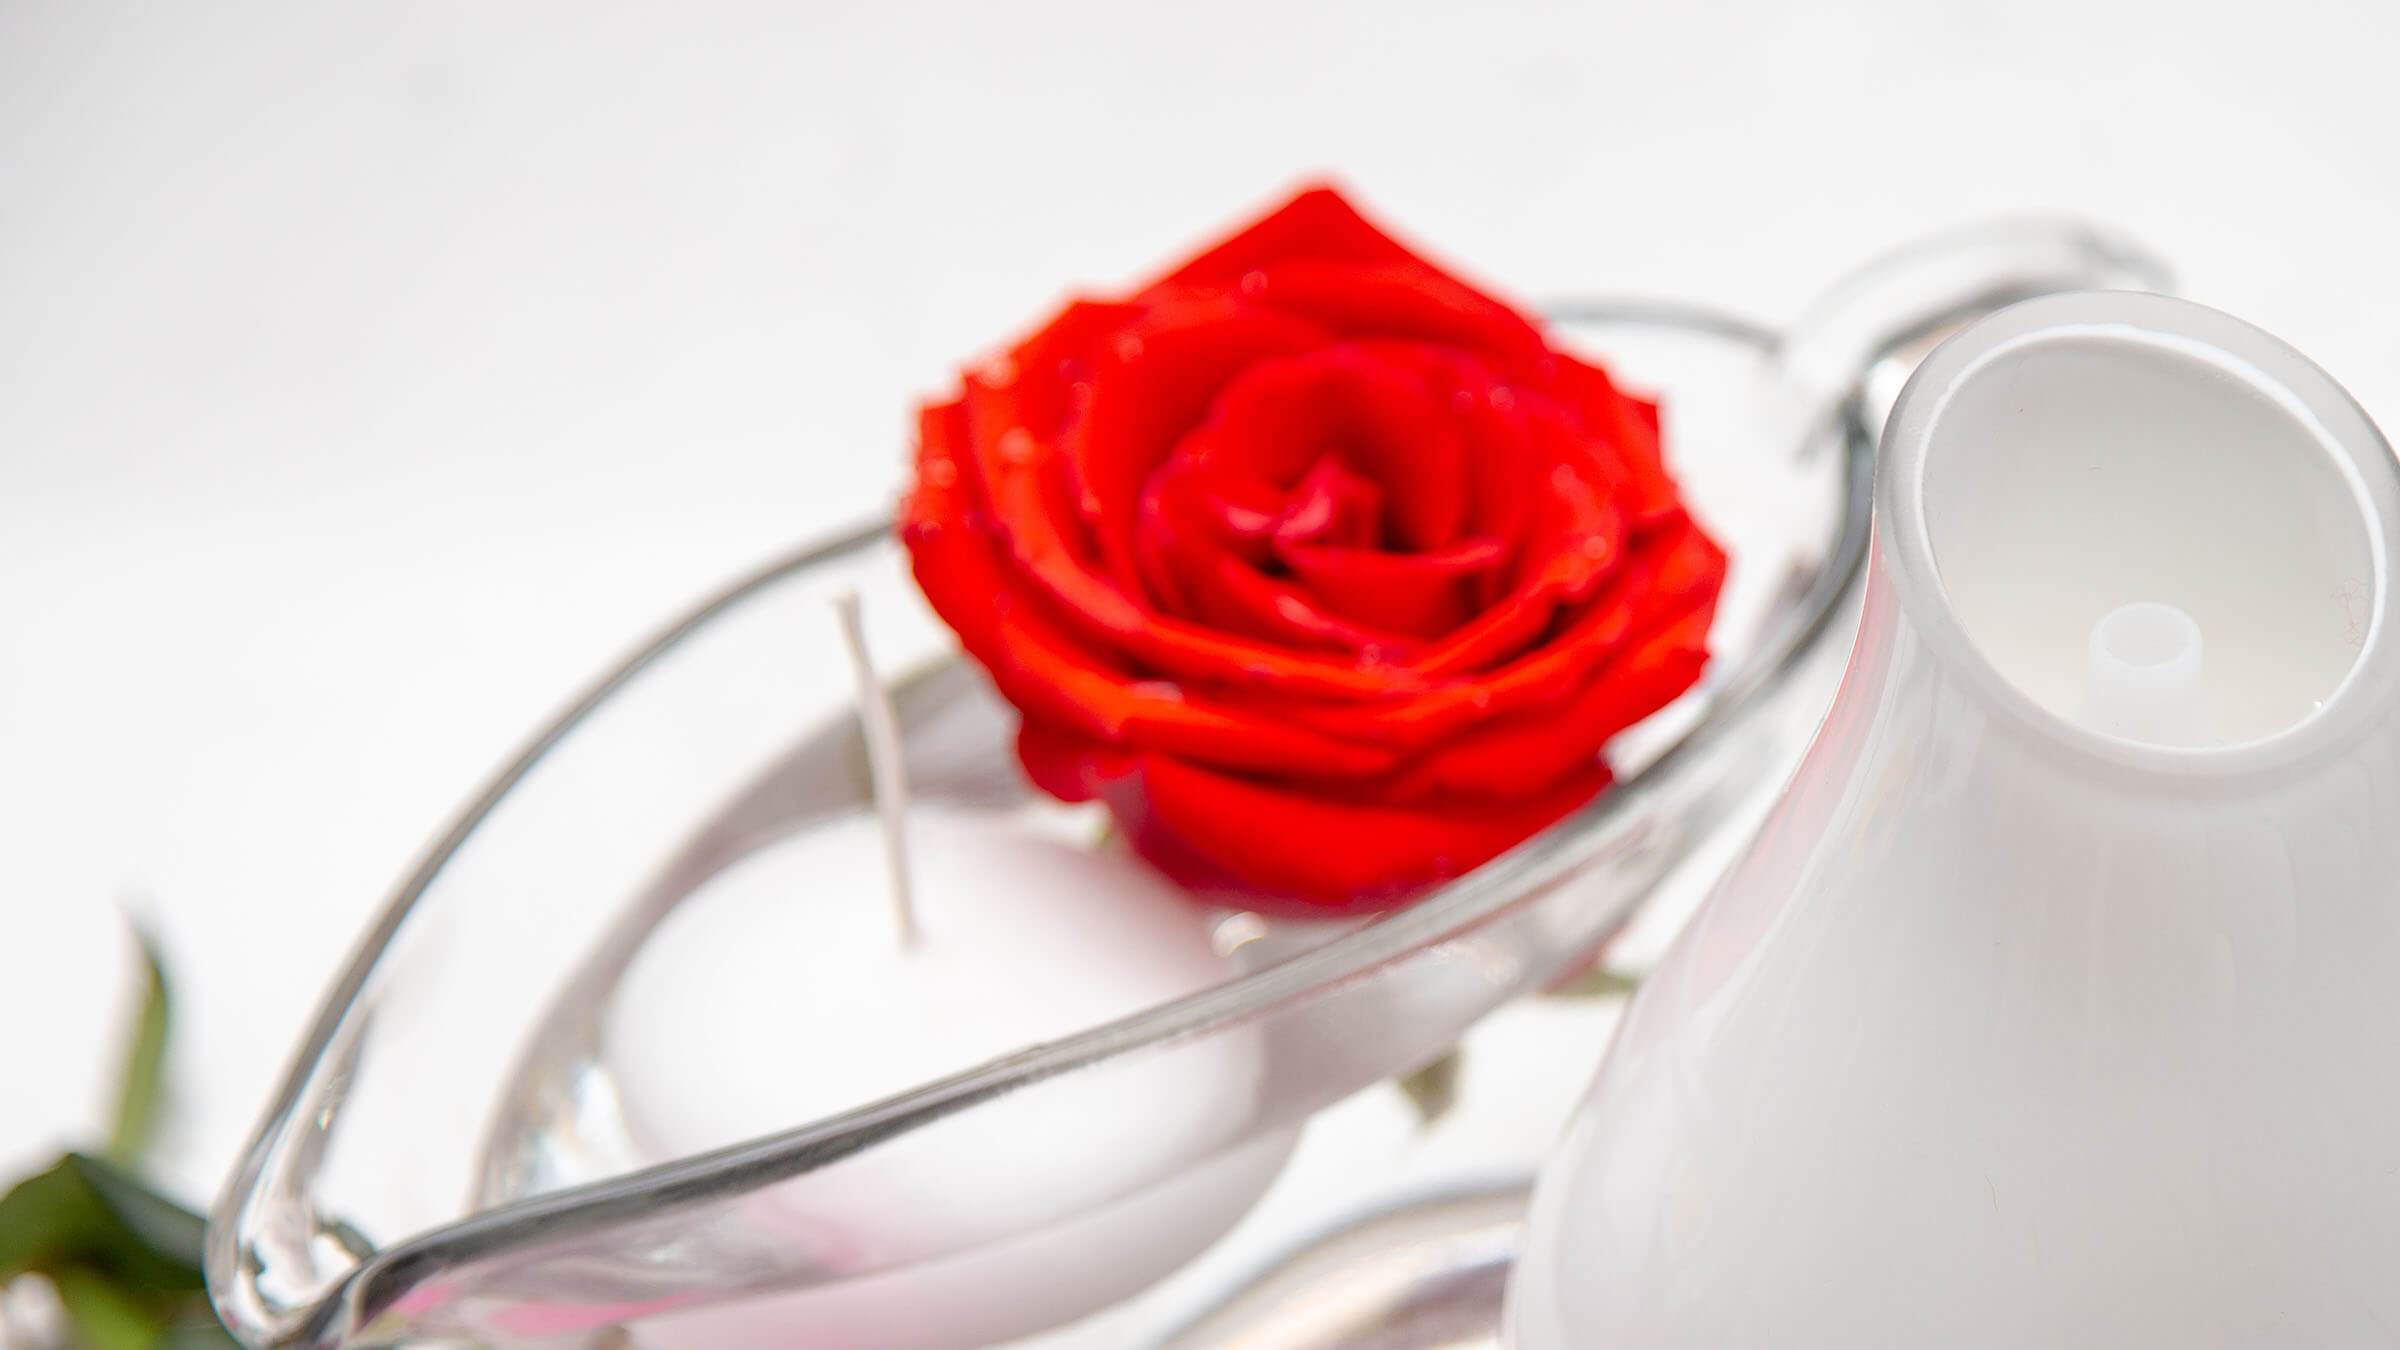 Enhance Romantic Experiences with Essential Oils on Valentine's Day